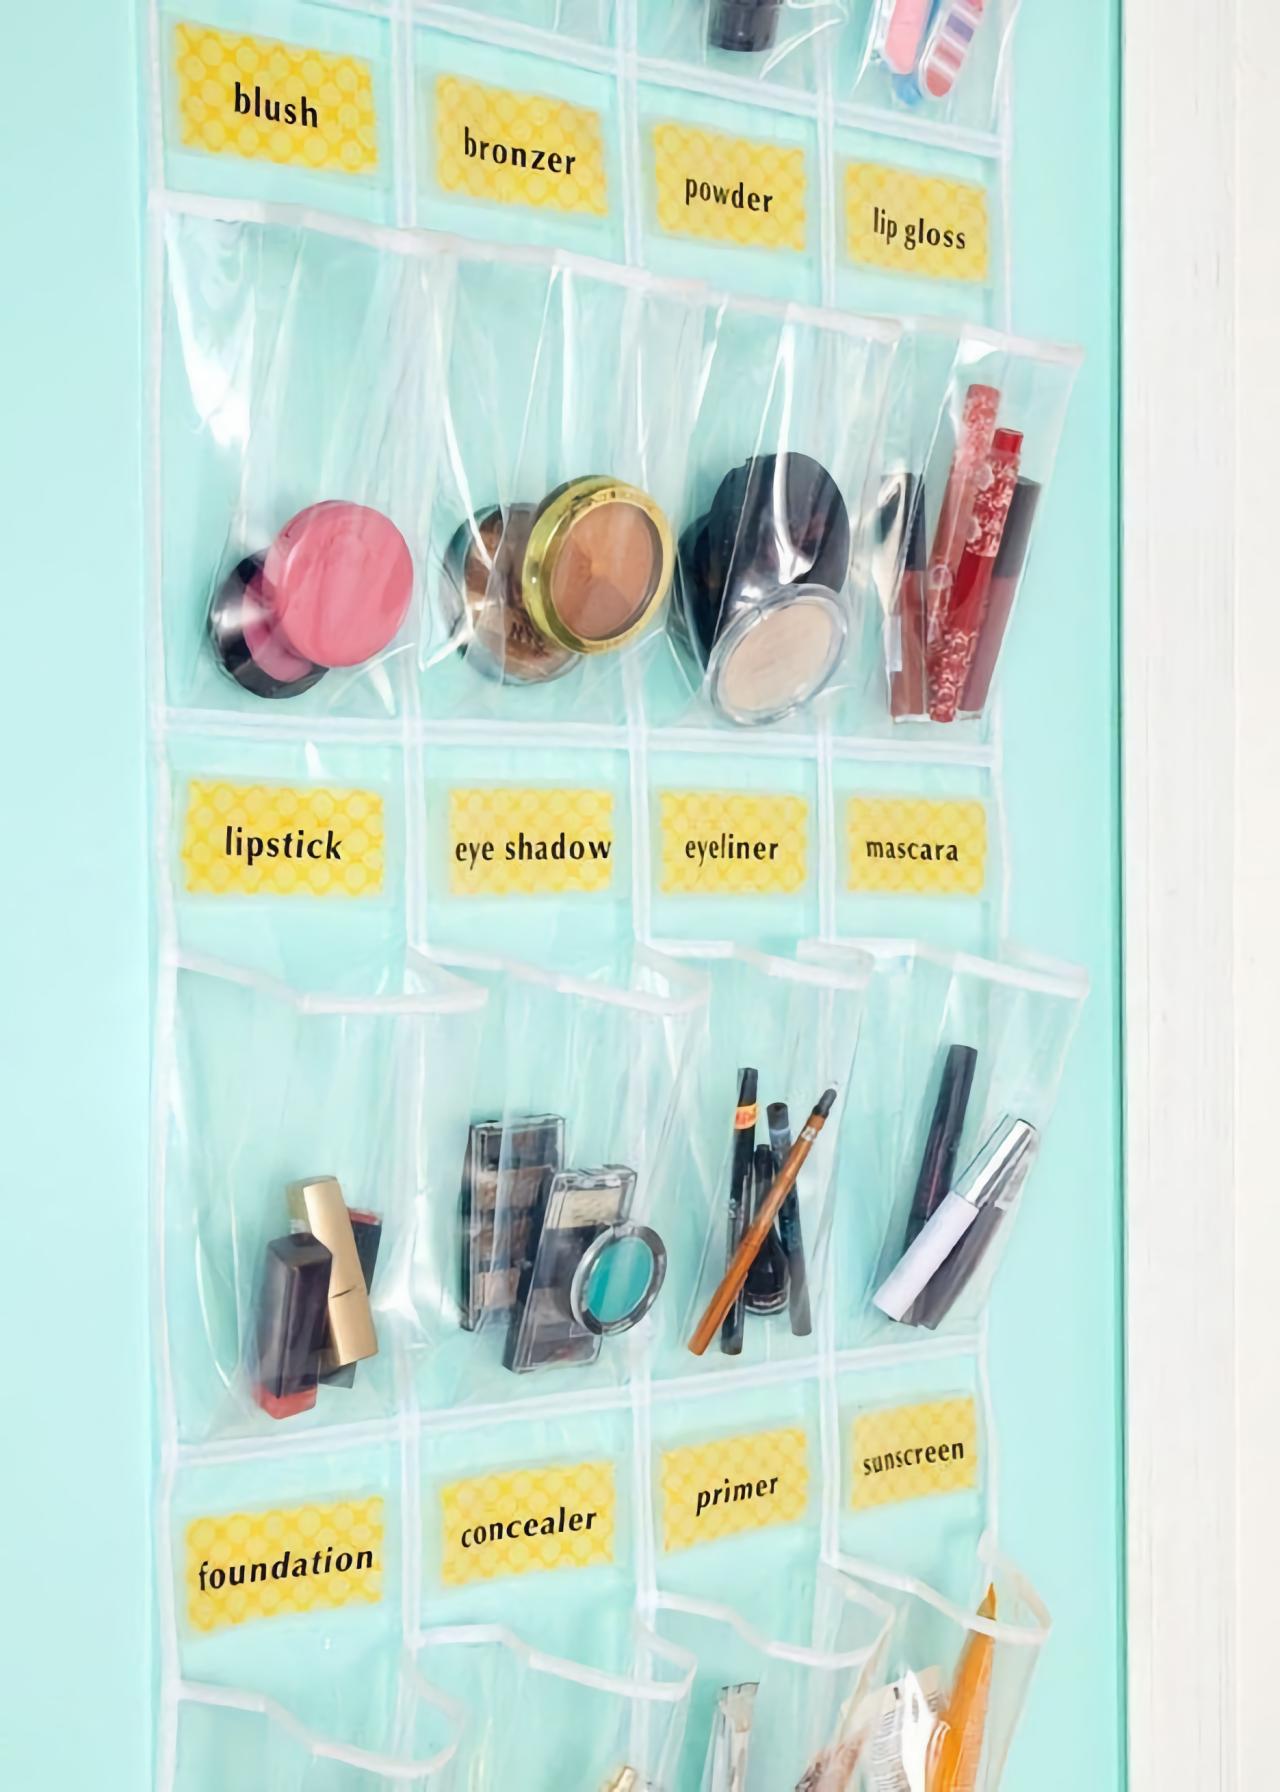 Makeup Storage and Organization: Tips and Ideas